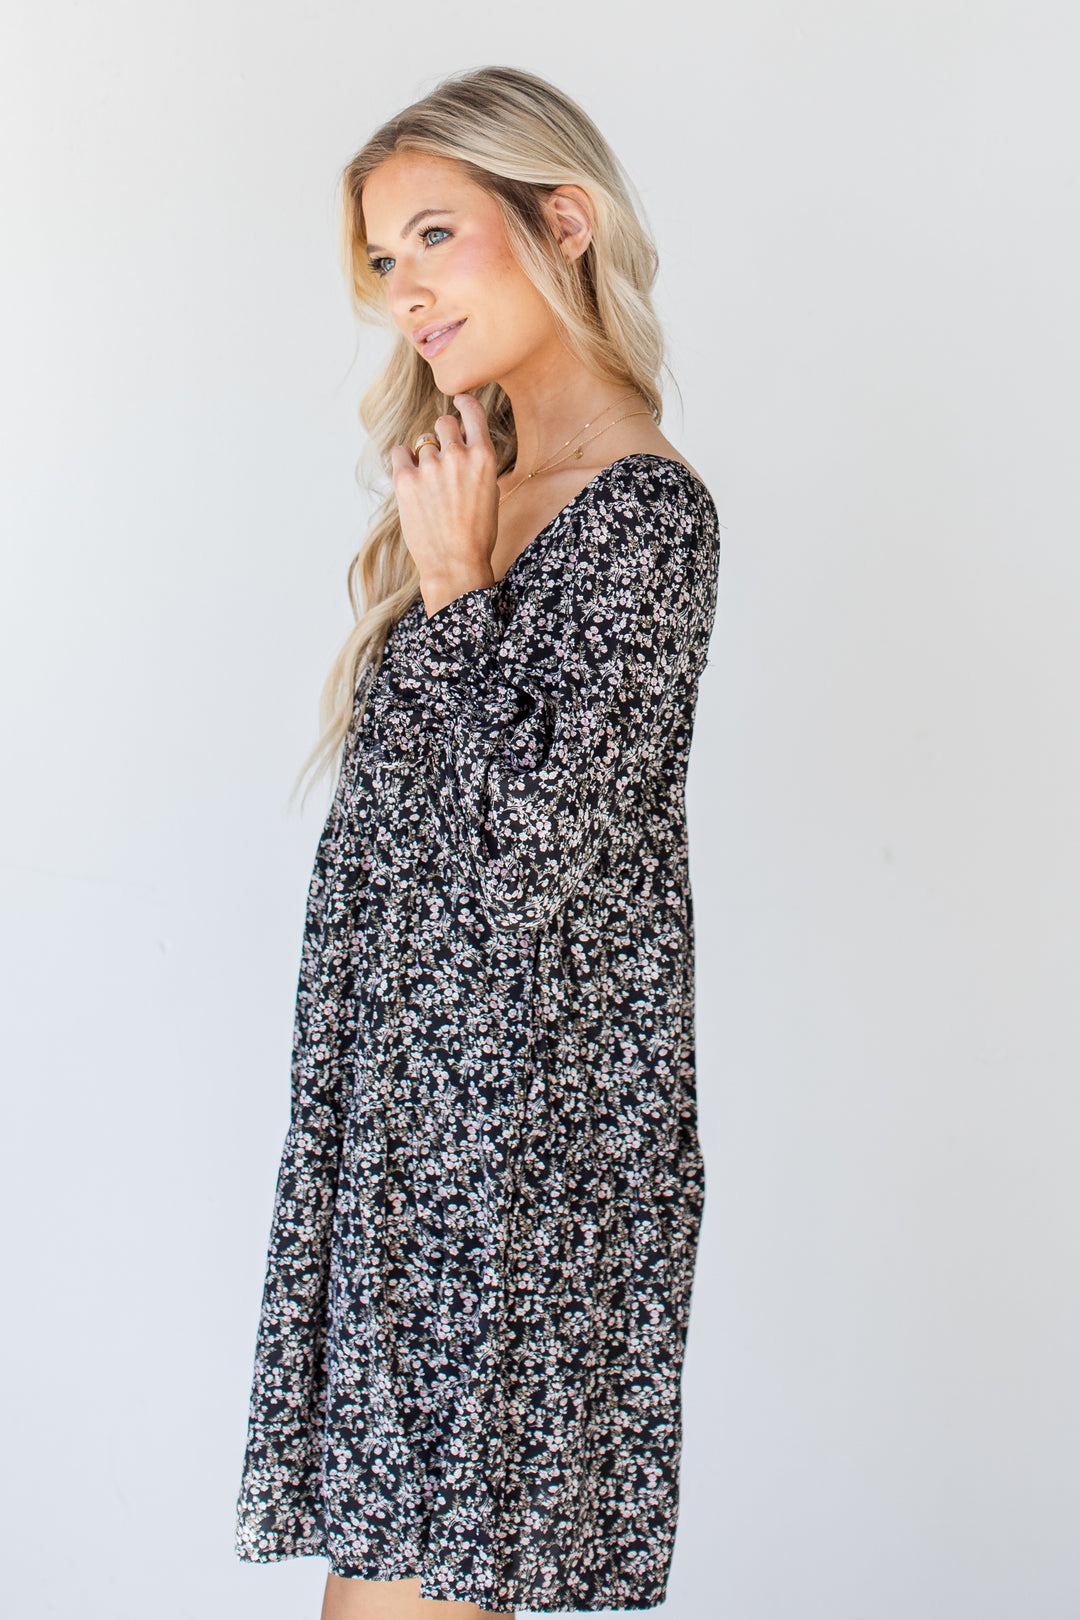 Tiered Floral Dress side view